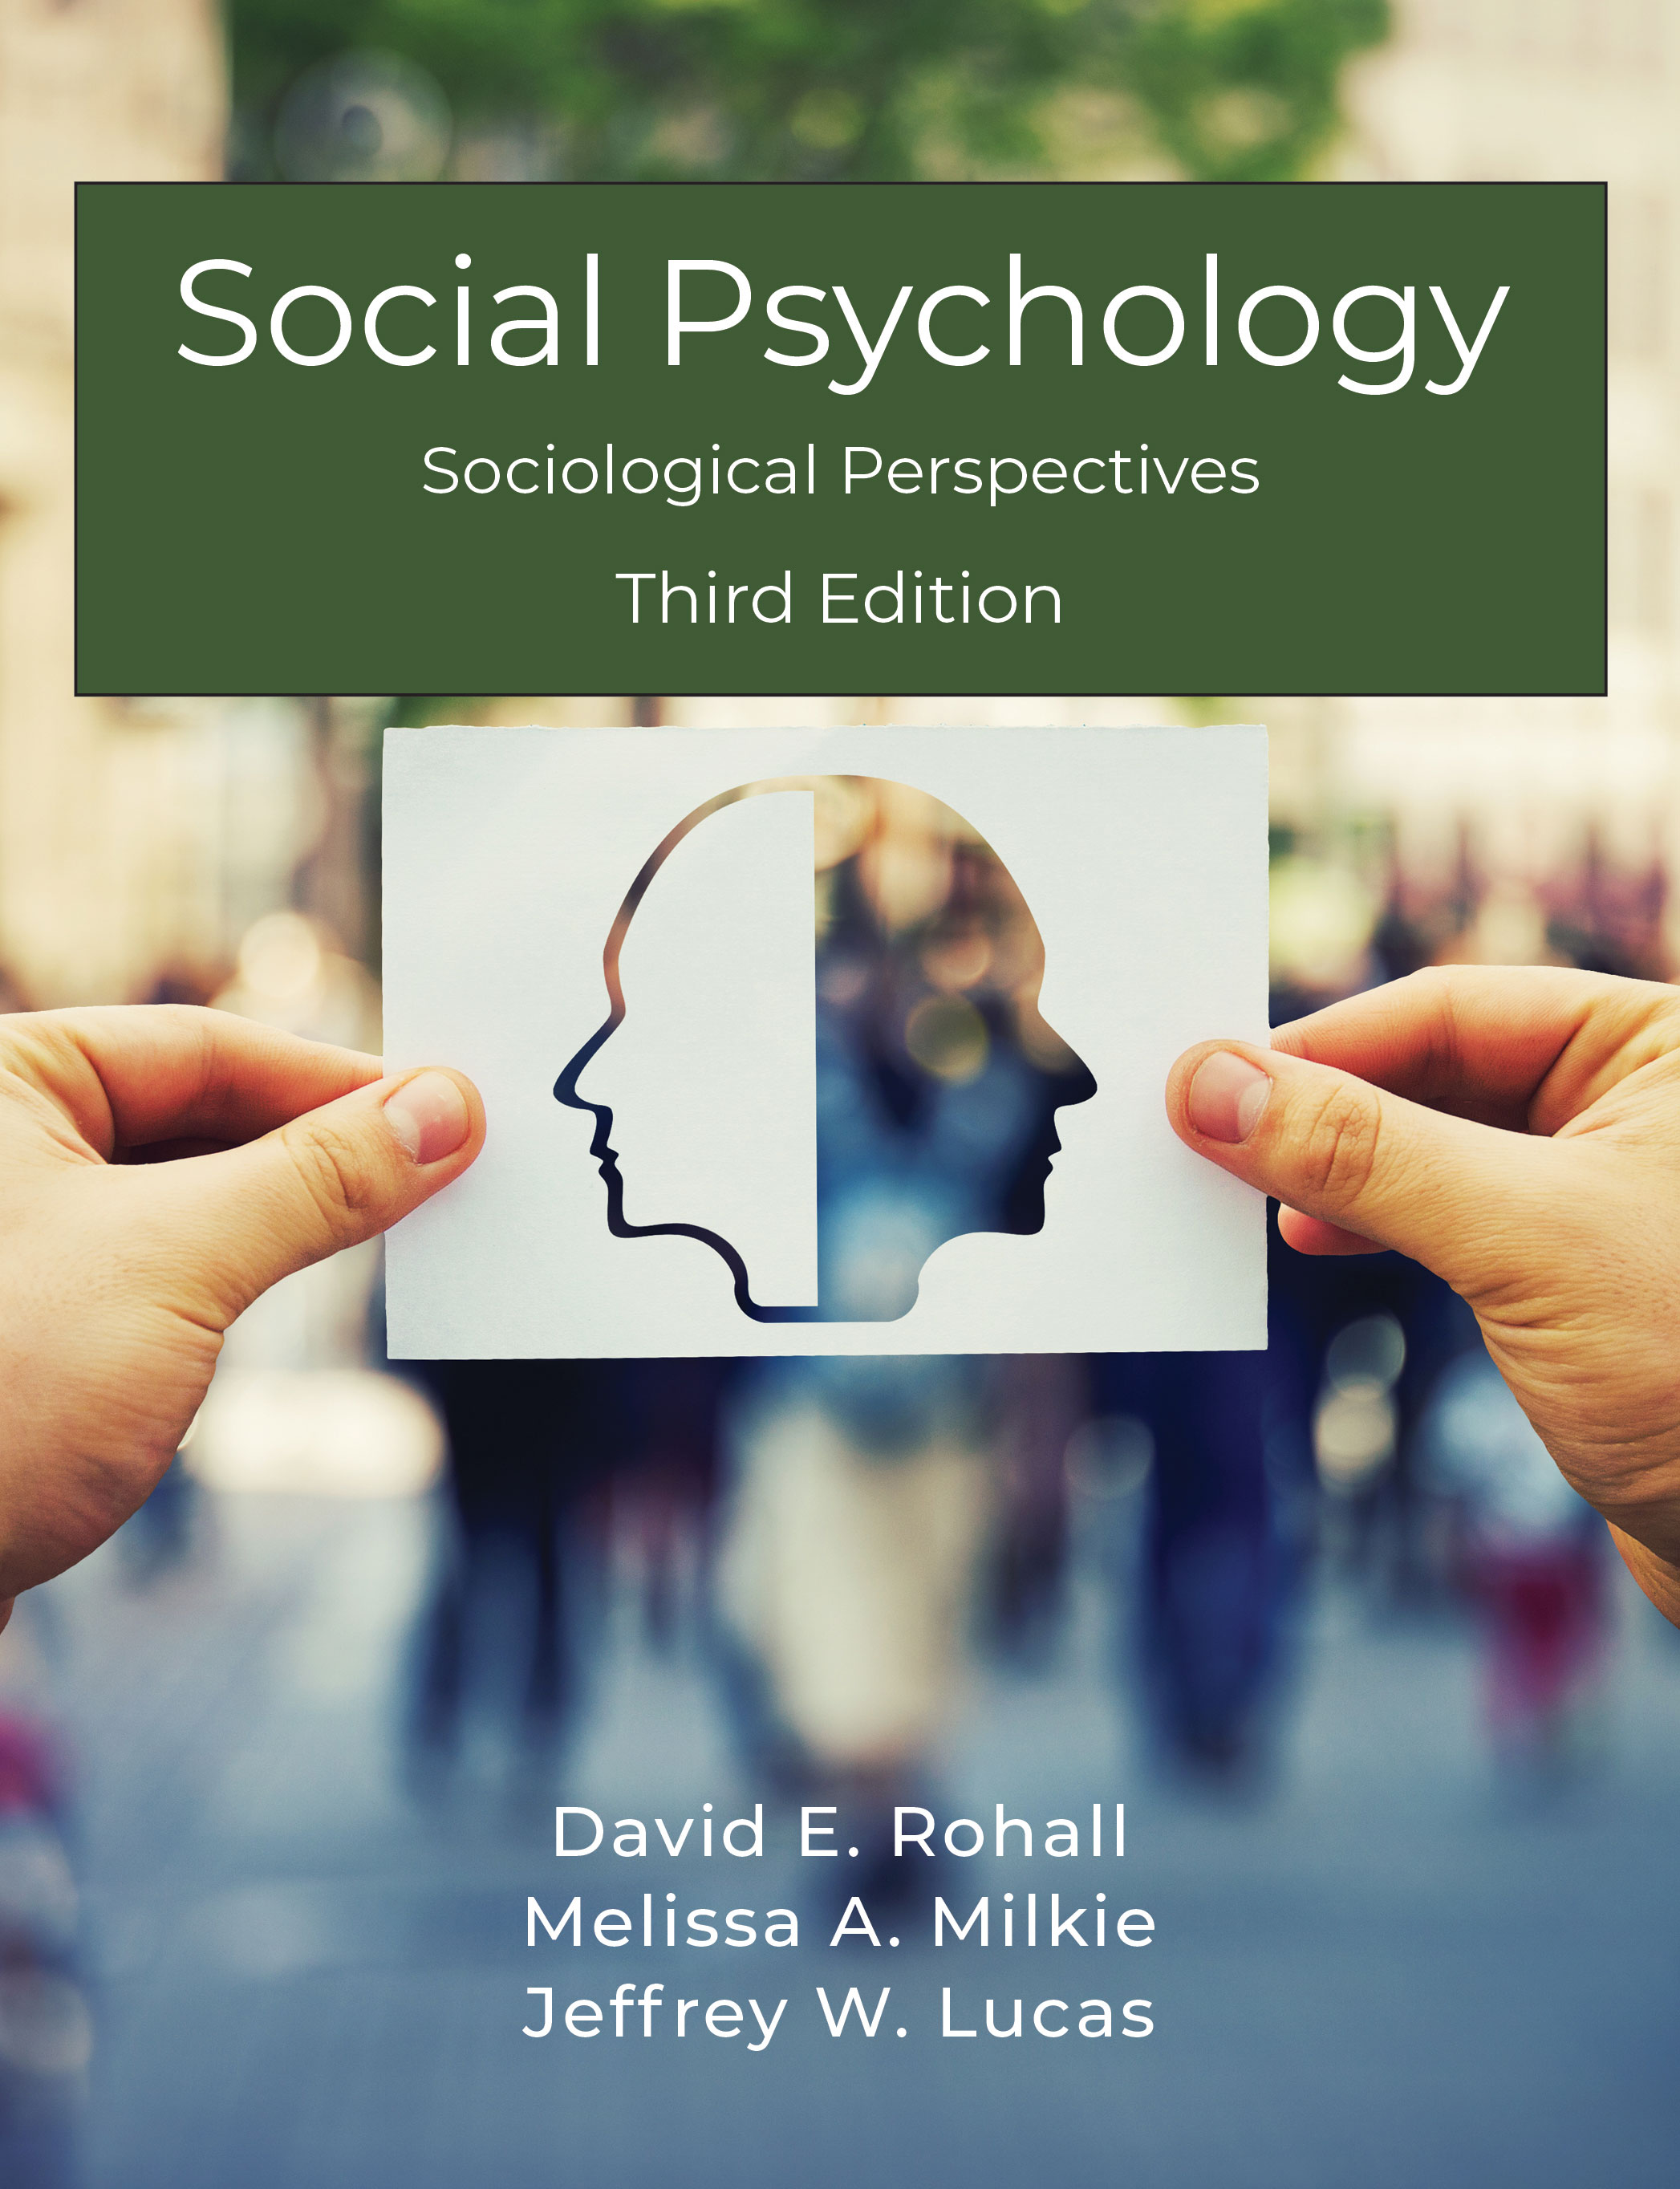 Social Psychology: Sociological Perspectives by David E. Rohall, Melissa A. Milkie, Jeffrey W. Lucas